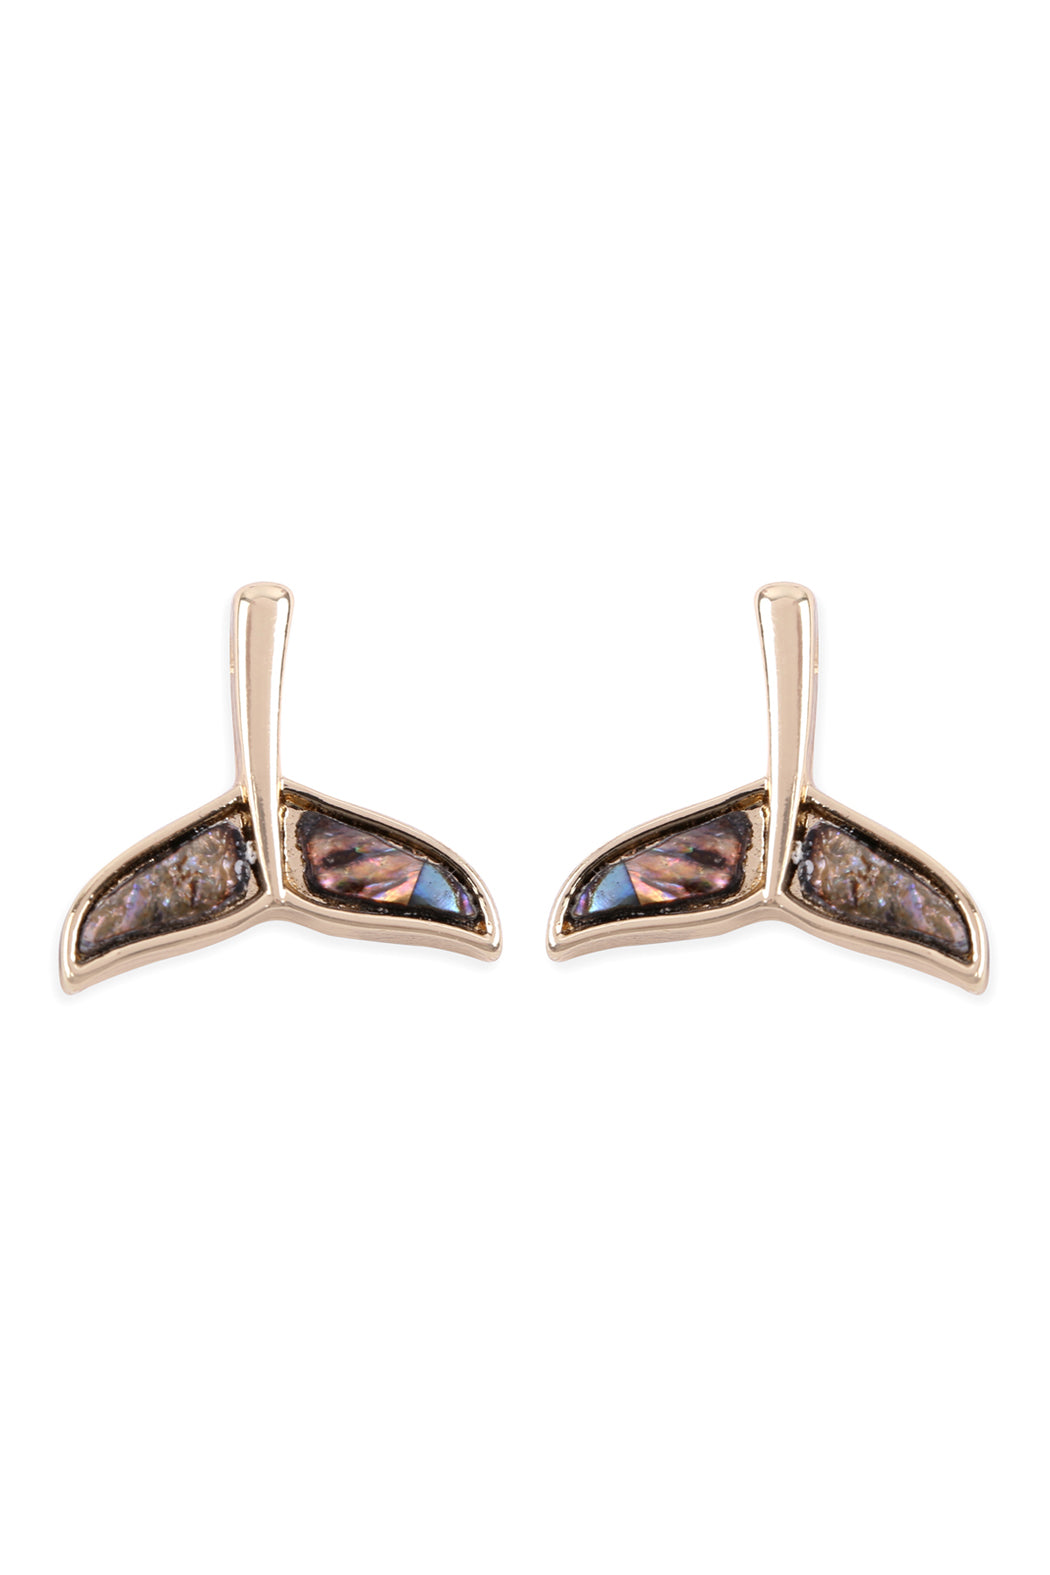 ABALONE WHALE TAIL EARRINGS